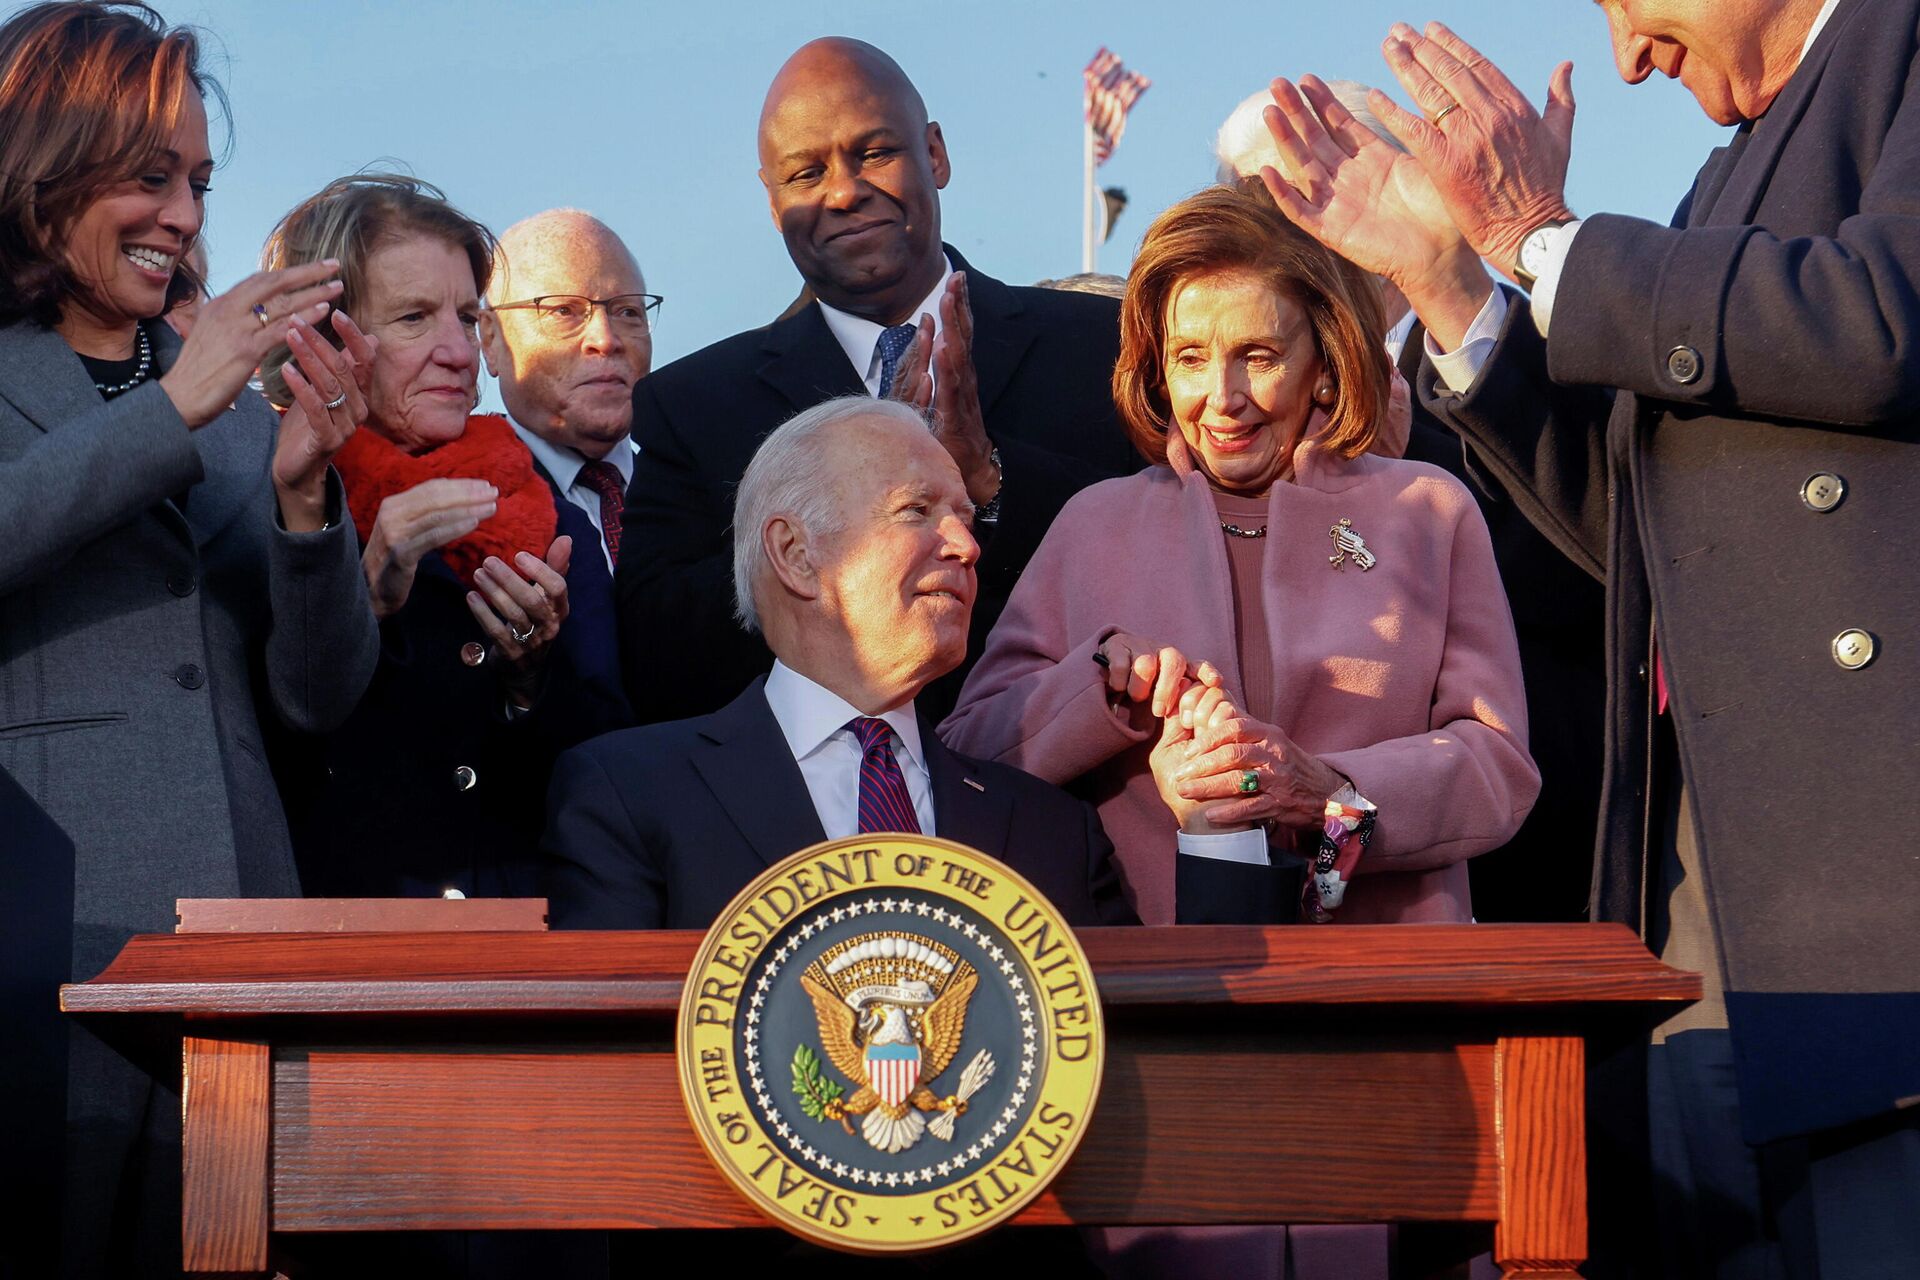 U.S. President Joe Biden celebrates with lawmakers including House Speaker Nancy Pelosi (D-CA) and Senate Majority Leader Chuck Schumer (D-NY) after signing the Infrastructure Investment and Jobs Act on the South Lawn at the White House in Washington, U.S. November 15, 2021 - Sputnik International, 1920, 23.11.2021